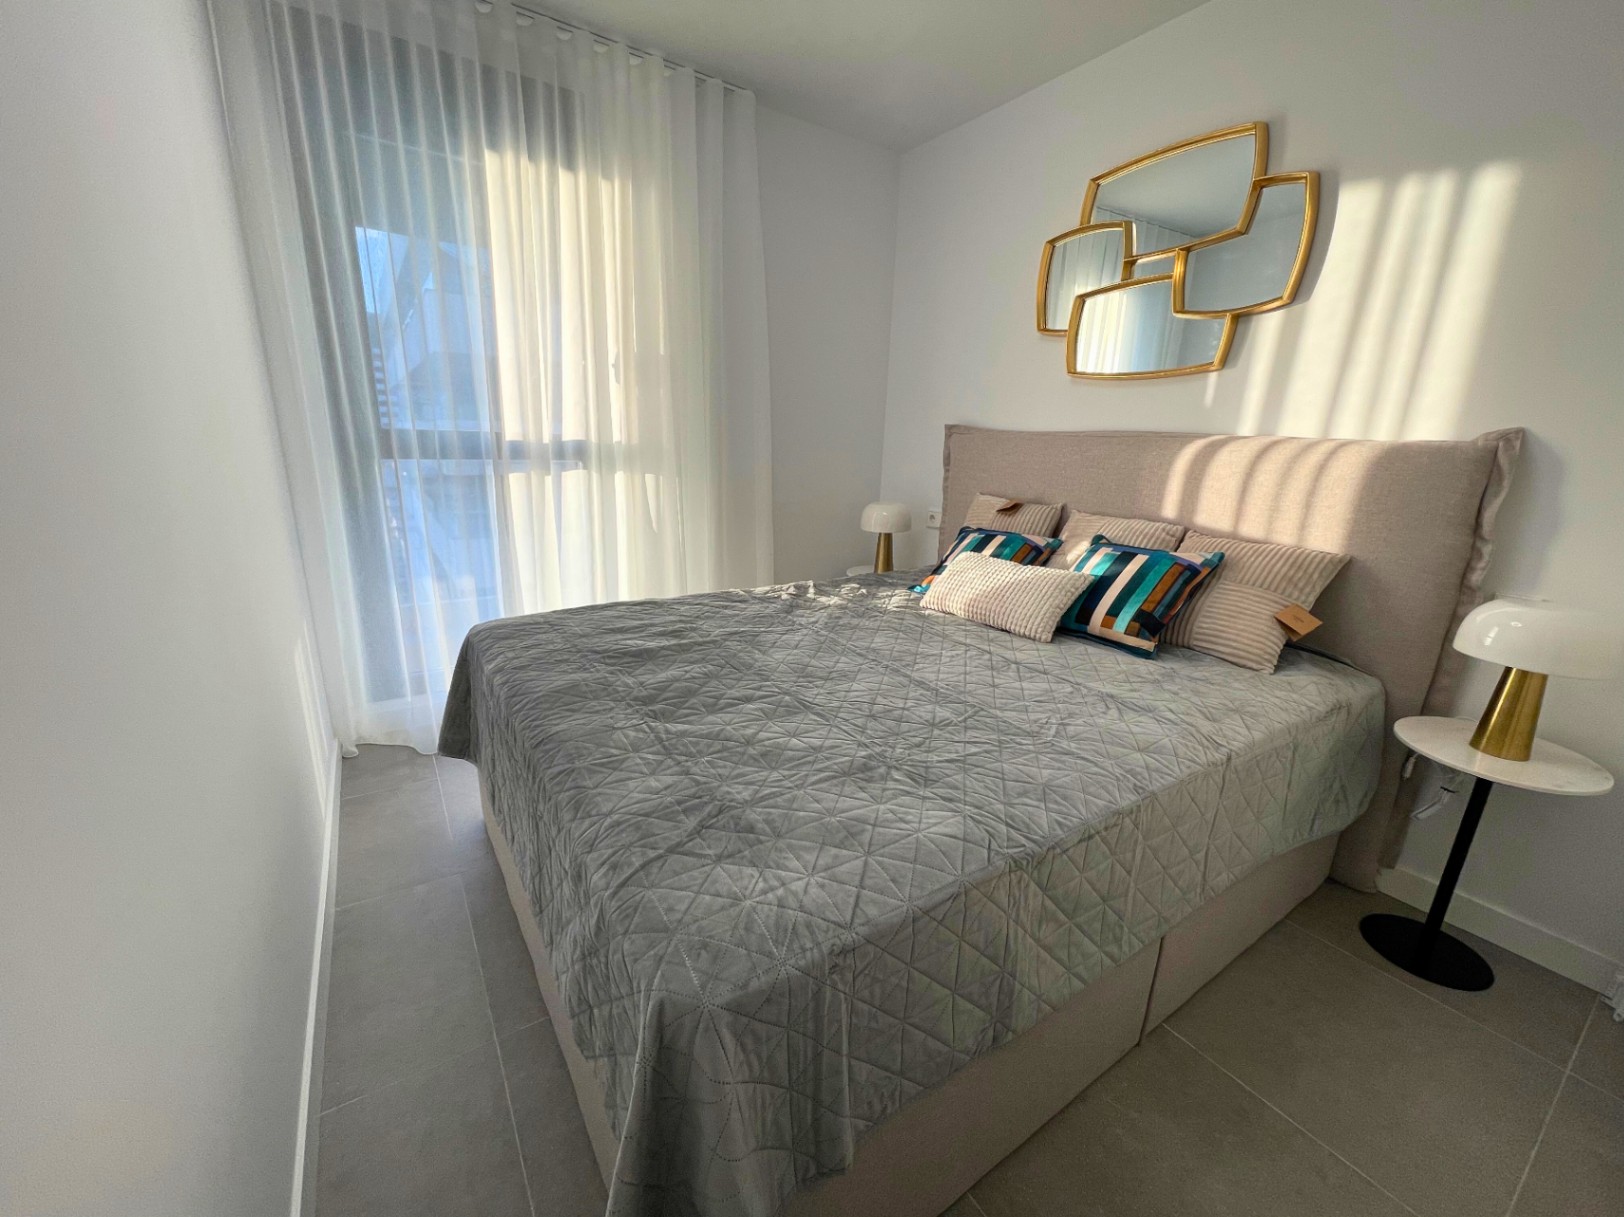 NEW BUILD 3-BEDROOM APARTMENT FOR SALE IN CALPE